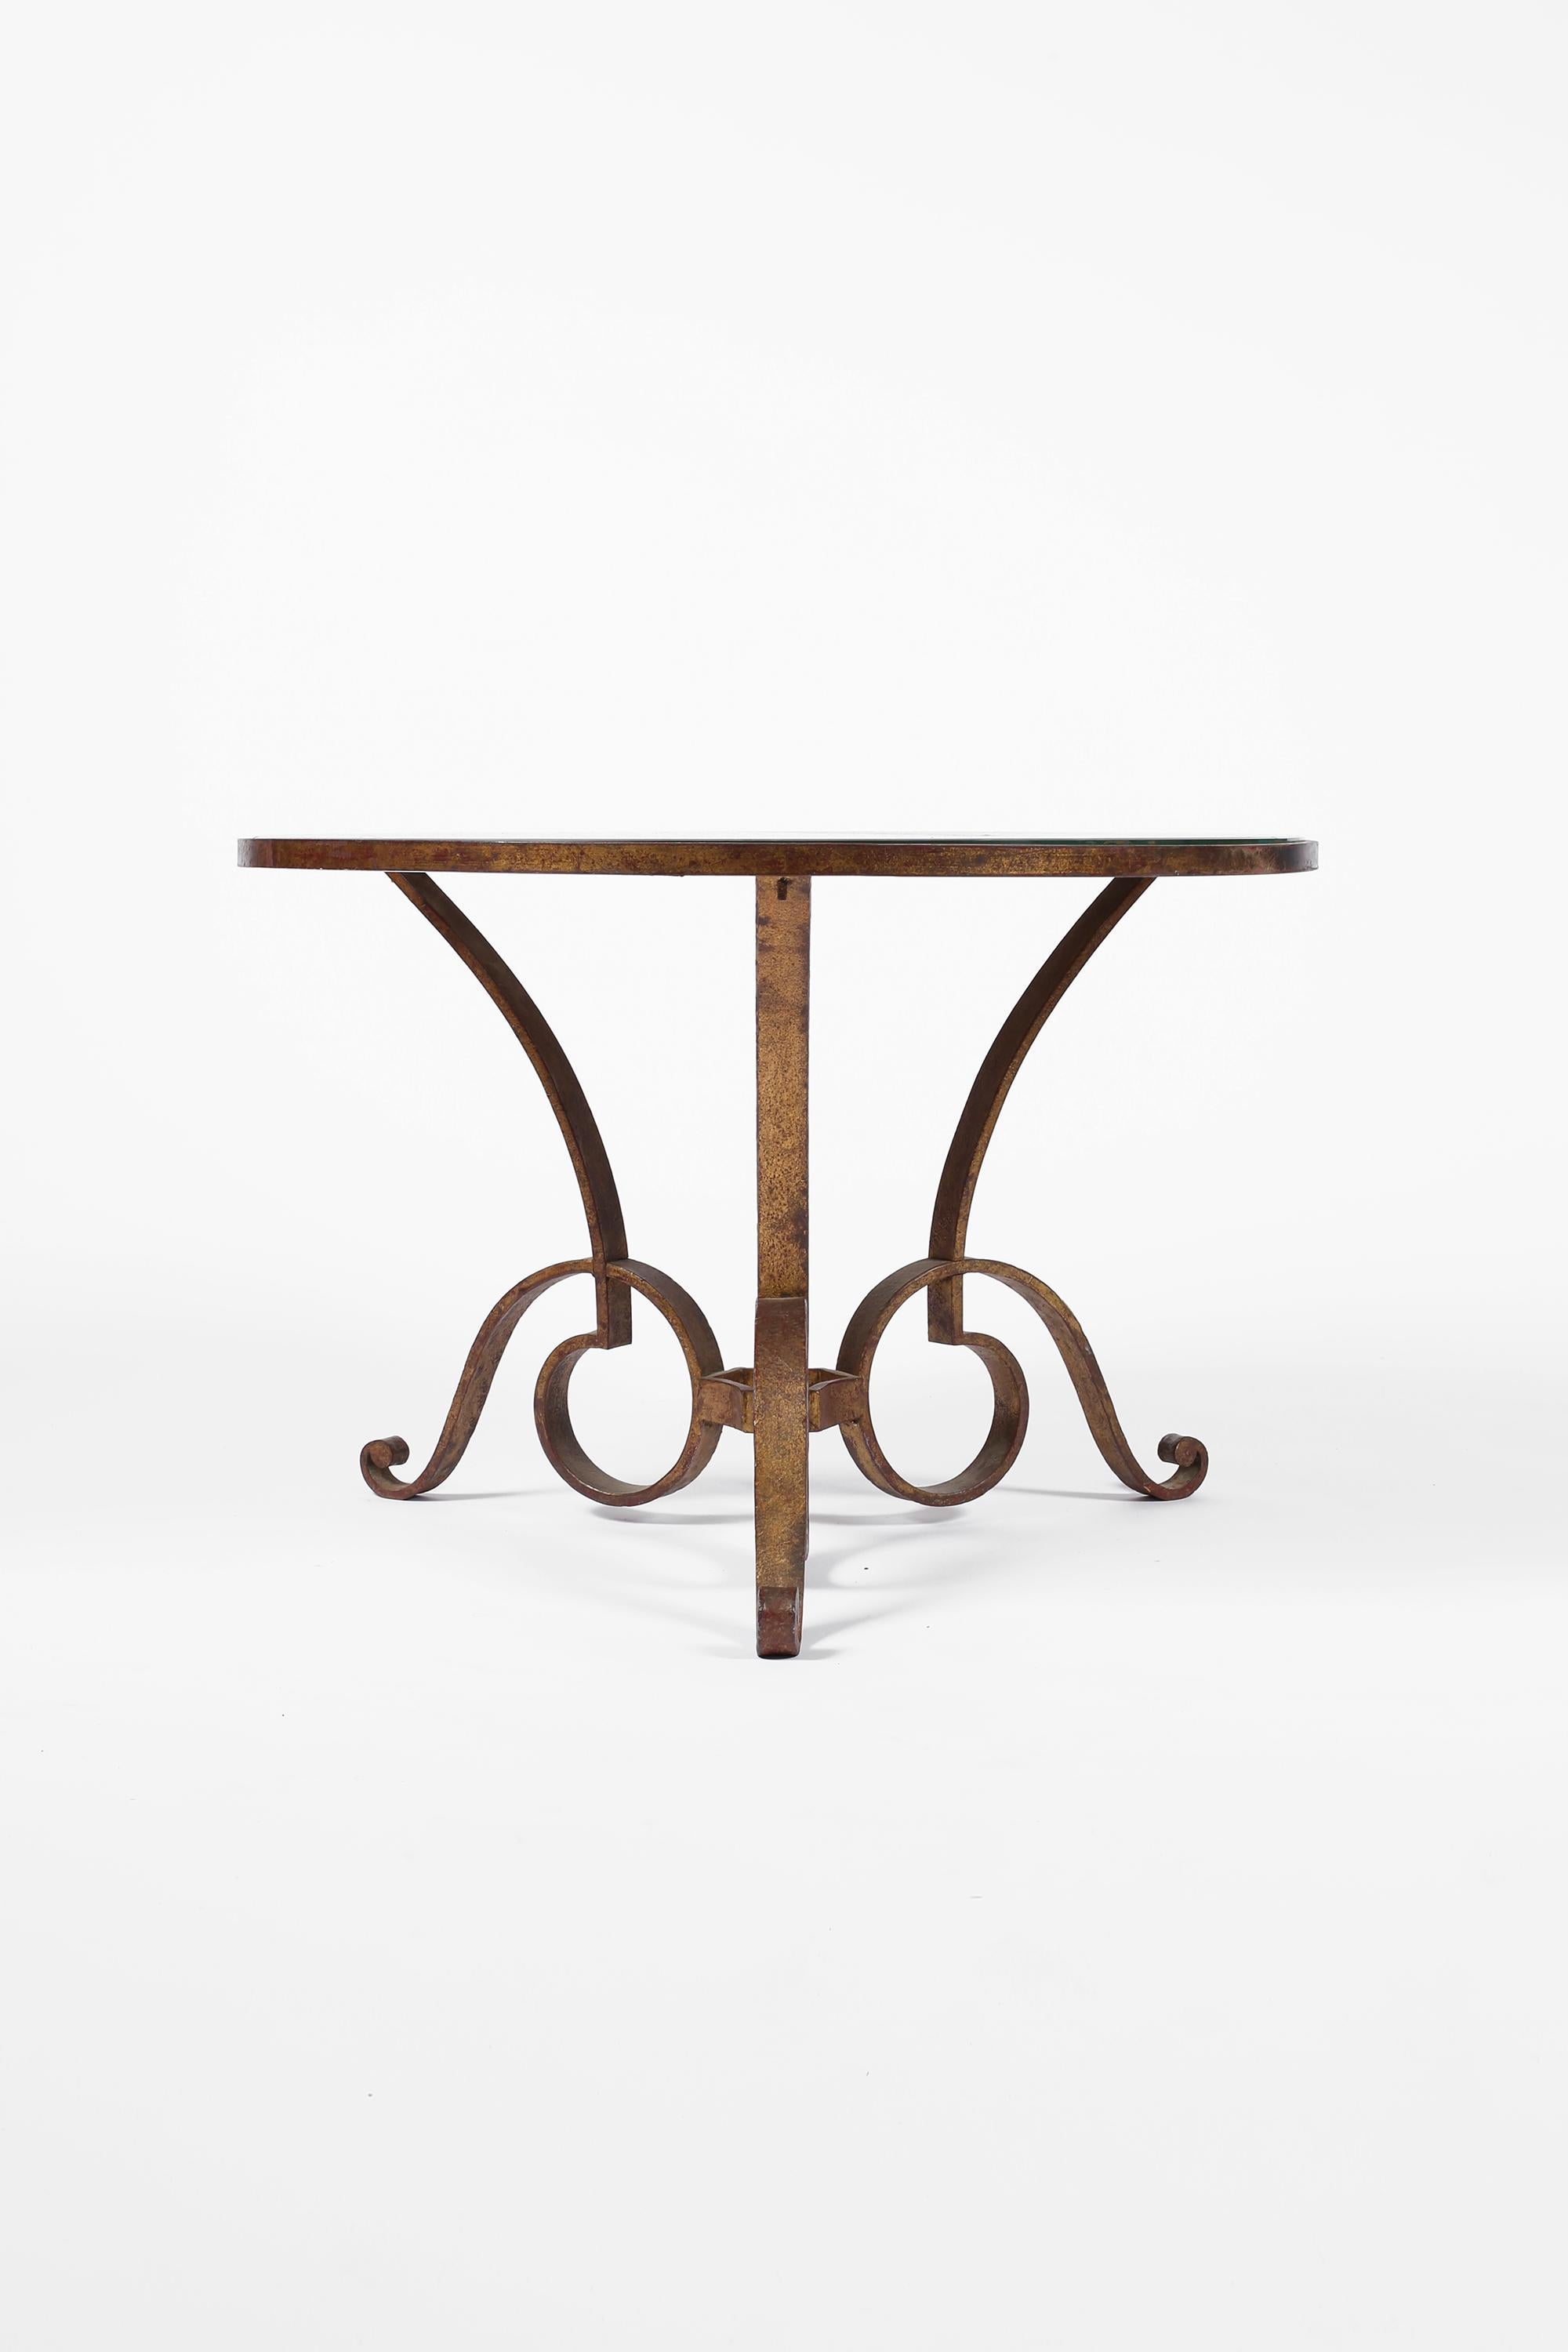 A large circular coffee/side/occasional table by René Drouet (1899-1993), featuring a decorative gilt forged iron frame and beautifully distressed original églomisé glass top. French, circa 1940.